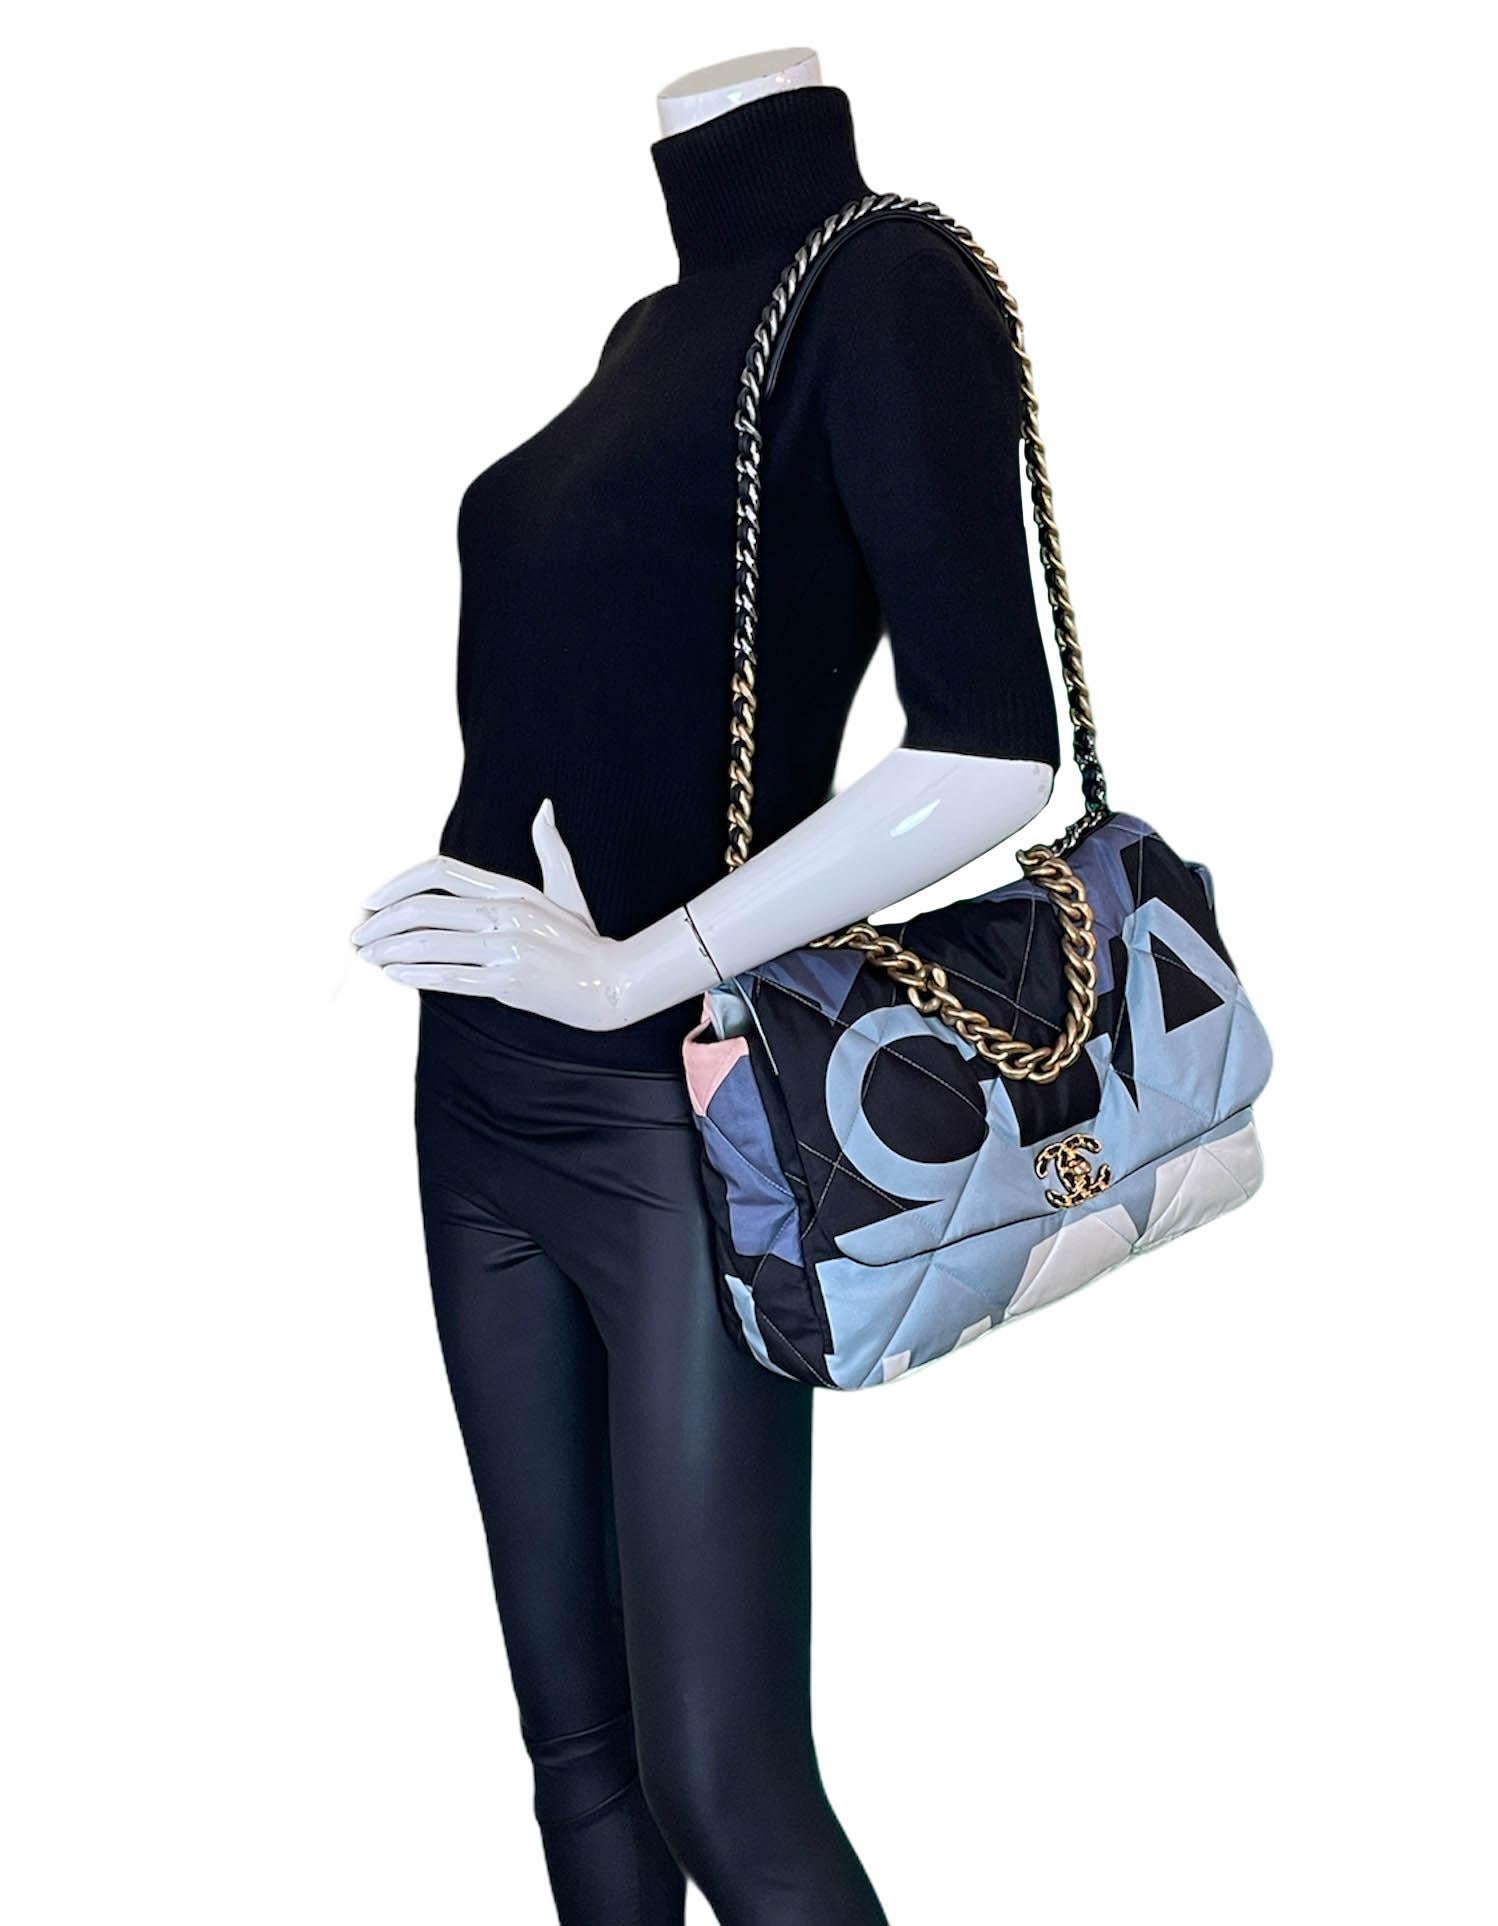 Chanel Blue/White/Black Nylon Maxi Scarf Chanel 19 Flap Bag

Made In: Italy
Year of Production: 2020
Color: Blue, white, black, pink
Hardware: Goldtone, silvertone, ruthenium 
Materials: Fabric, metal, leather
Lining: Pink grosgrain
Closure/Opening: